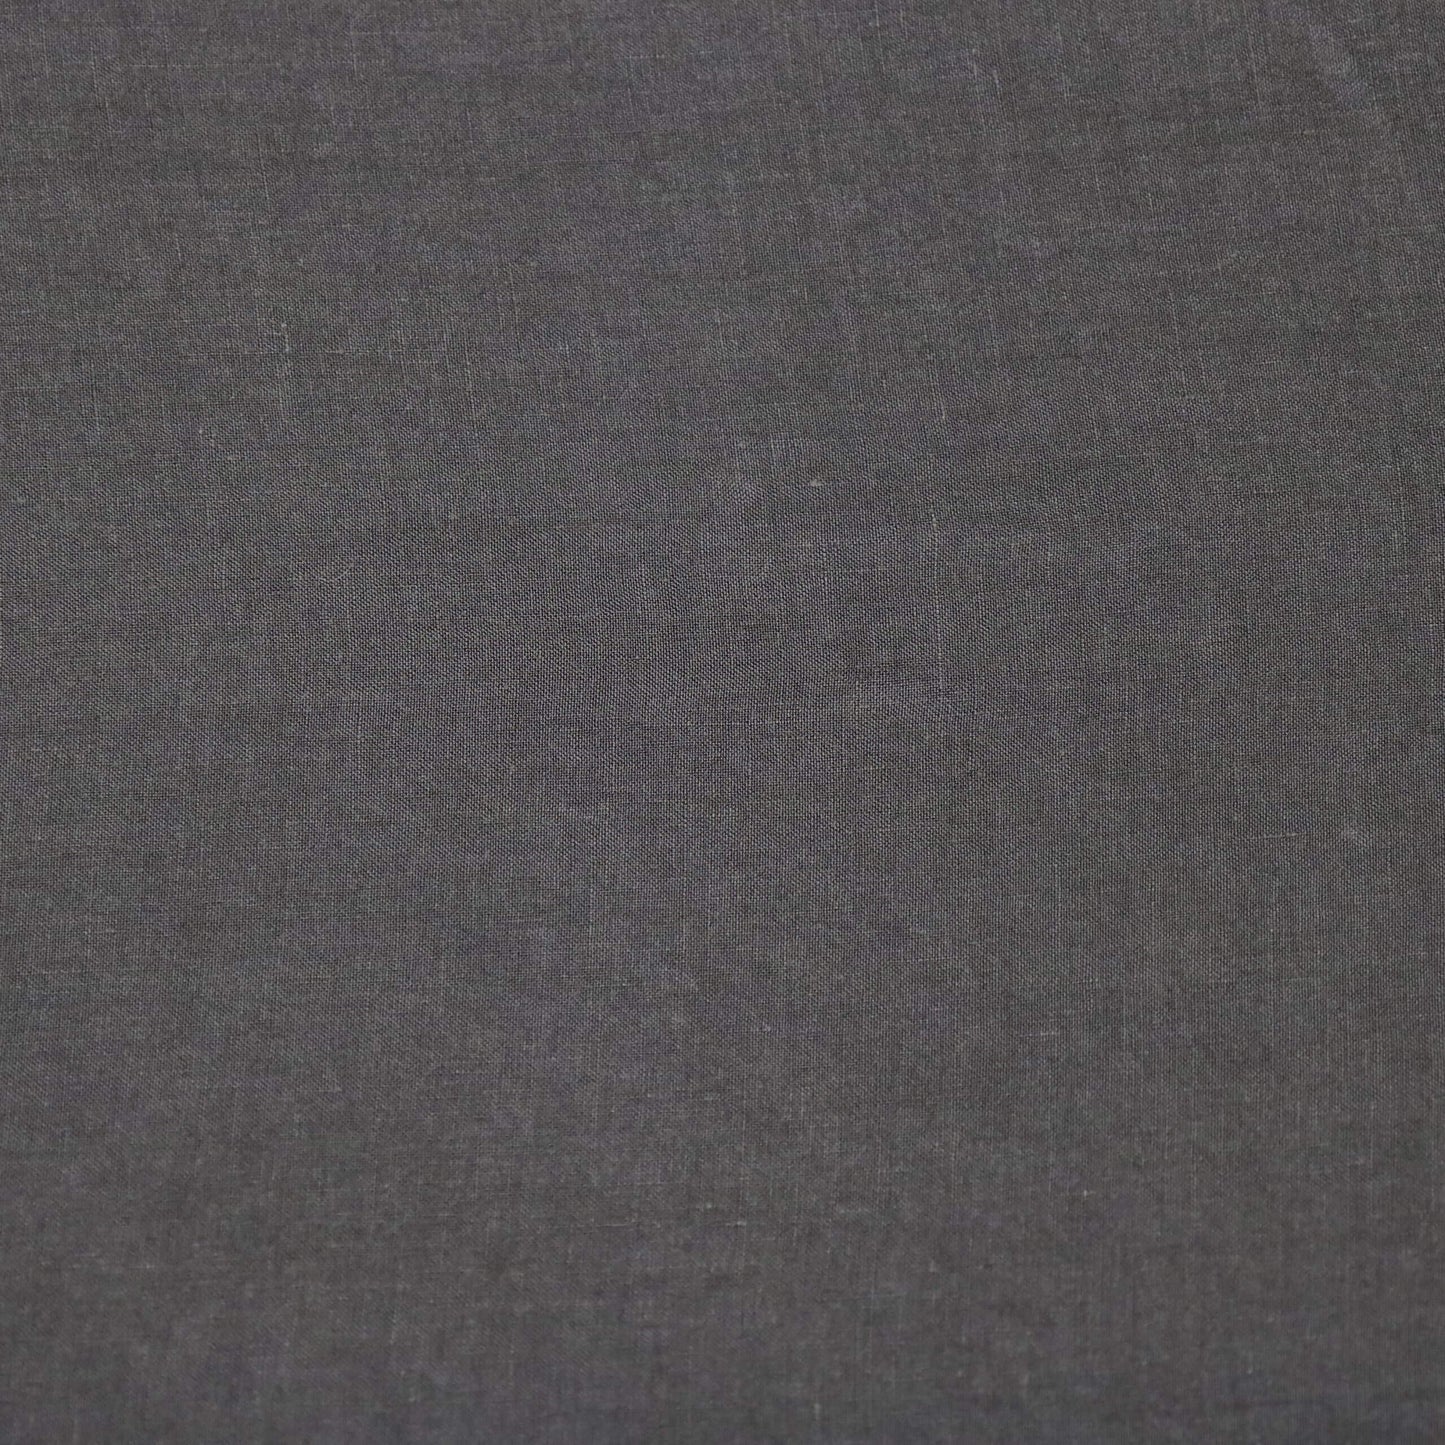 Bedsheet in linen from Society Limonta color Anthracite dark grey